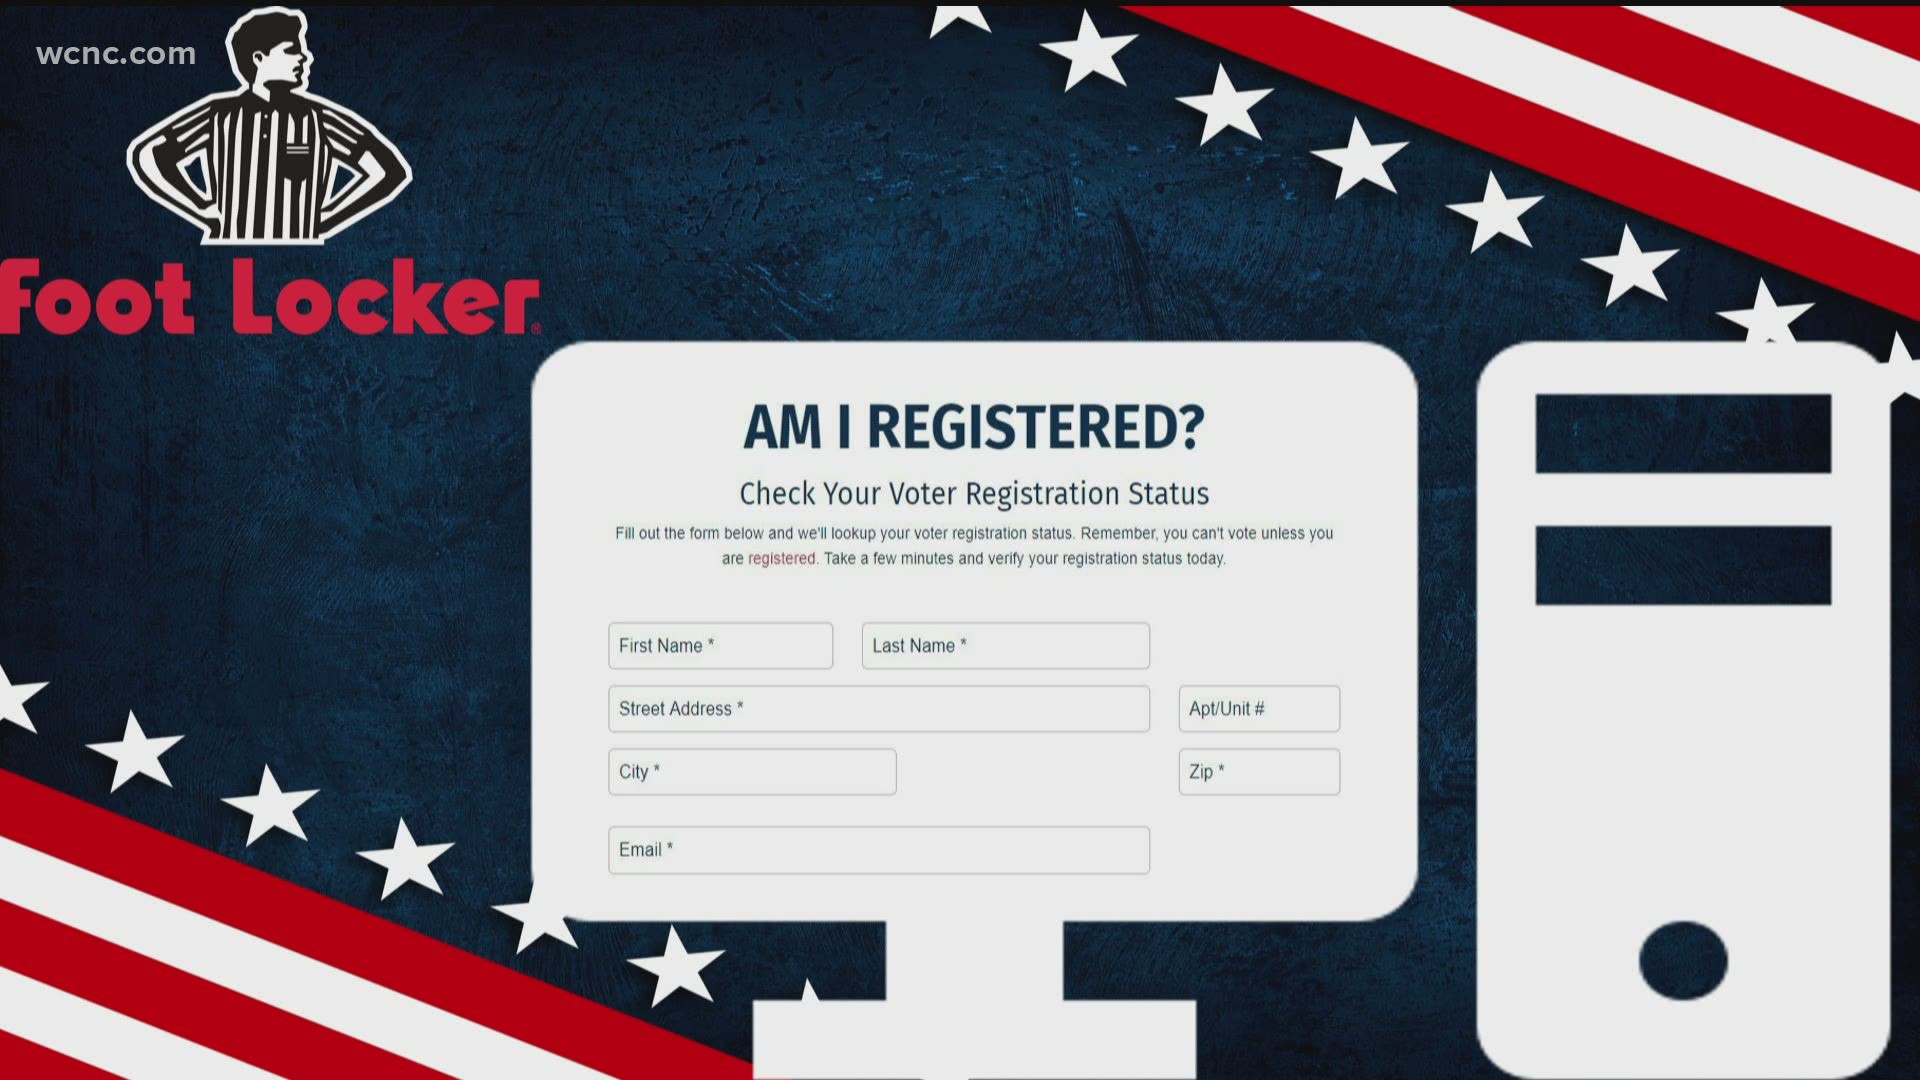 Today is National Voter Registration Day. The idea is to make sure people are registered to vote in their district.